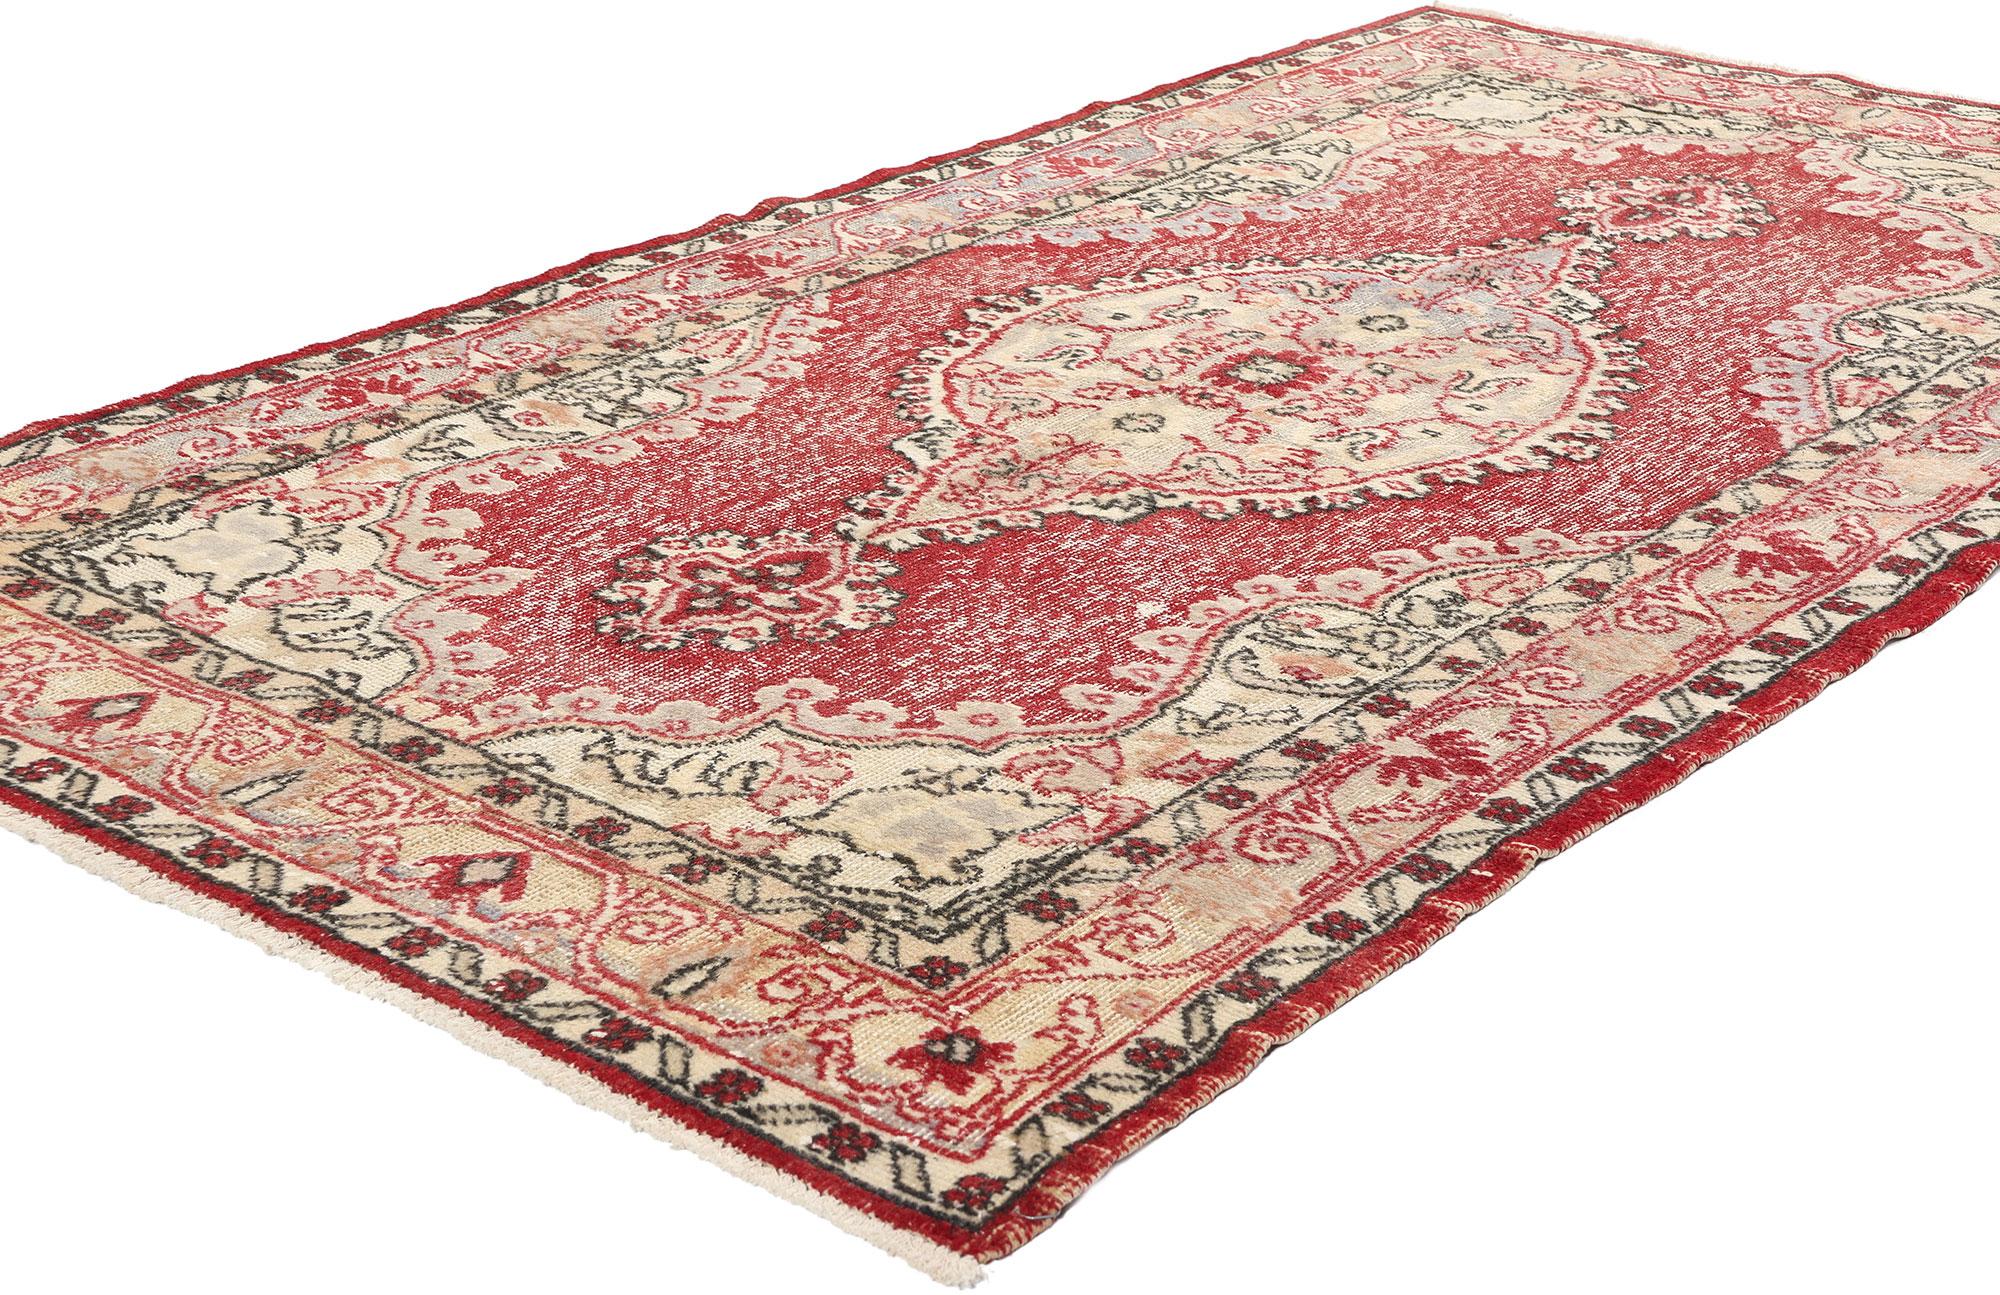 51941 Distressed Vintage Red Turkish Sivas Rug, 03'10 x 06'09. Distressed Turkish Sivas rugs are traditional rugs originating from Sivas in central Anatolia, Turkey. These authentic Sivas rugs undergo intentional aging processes such as distressing